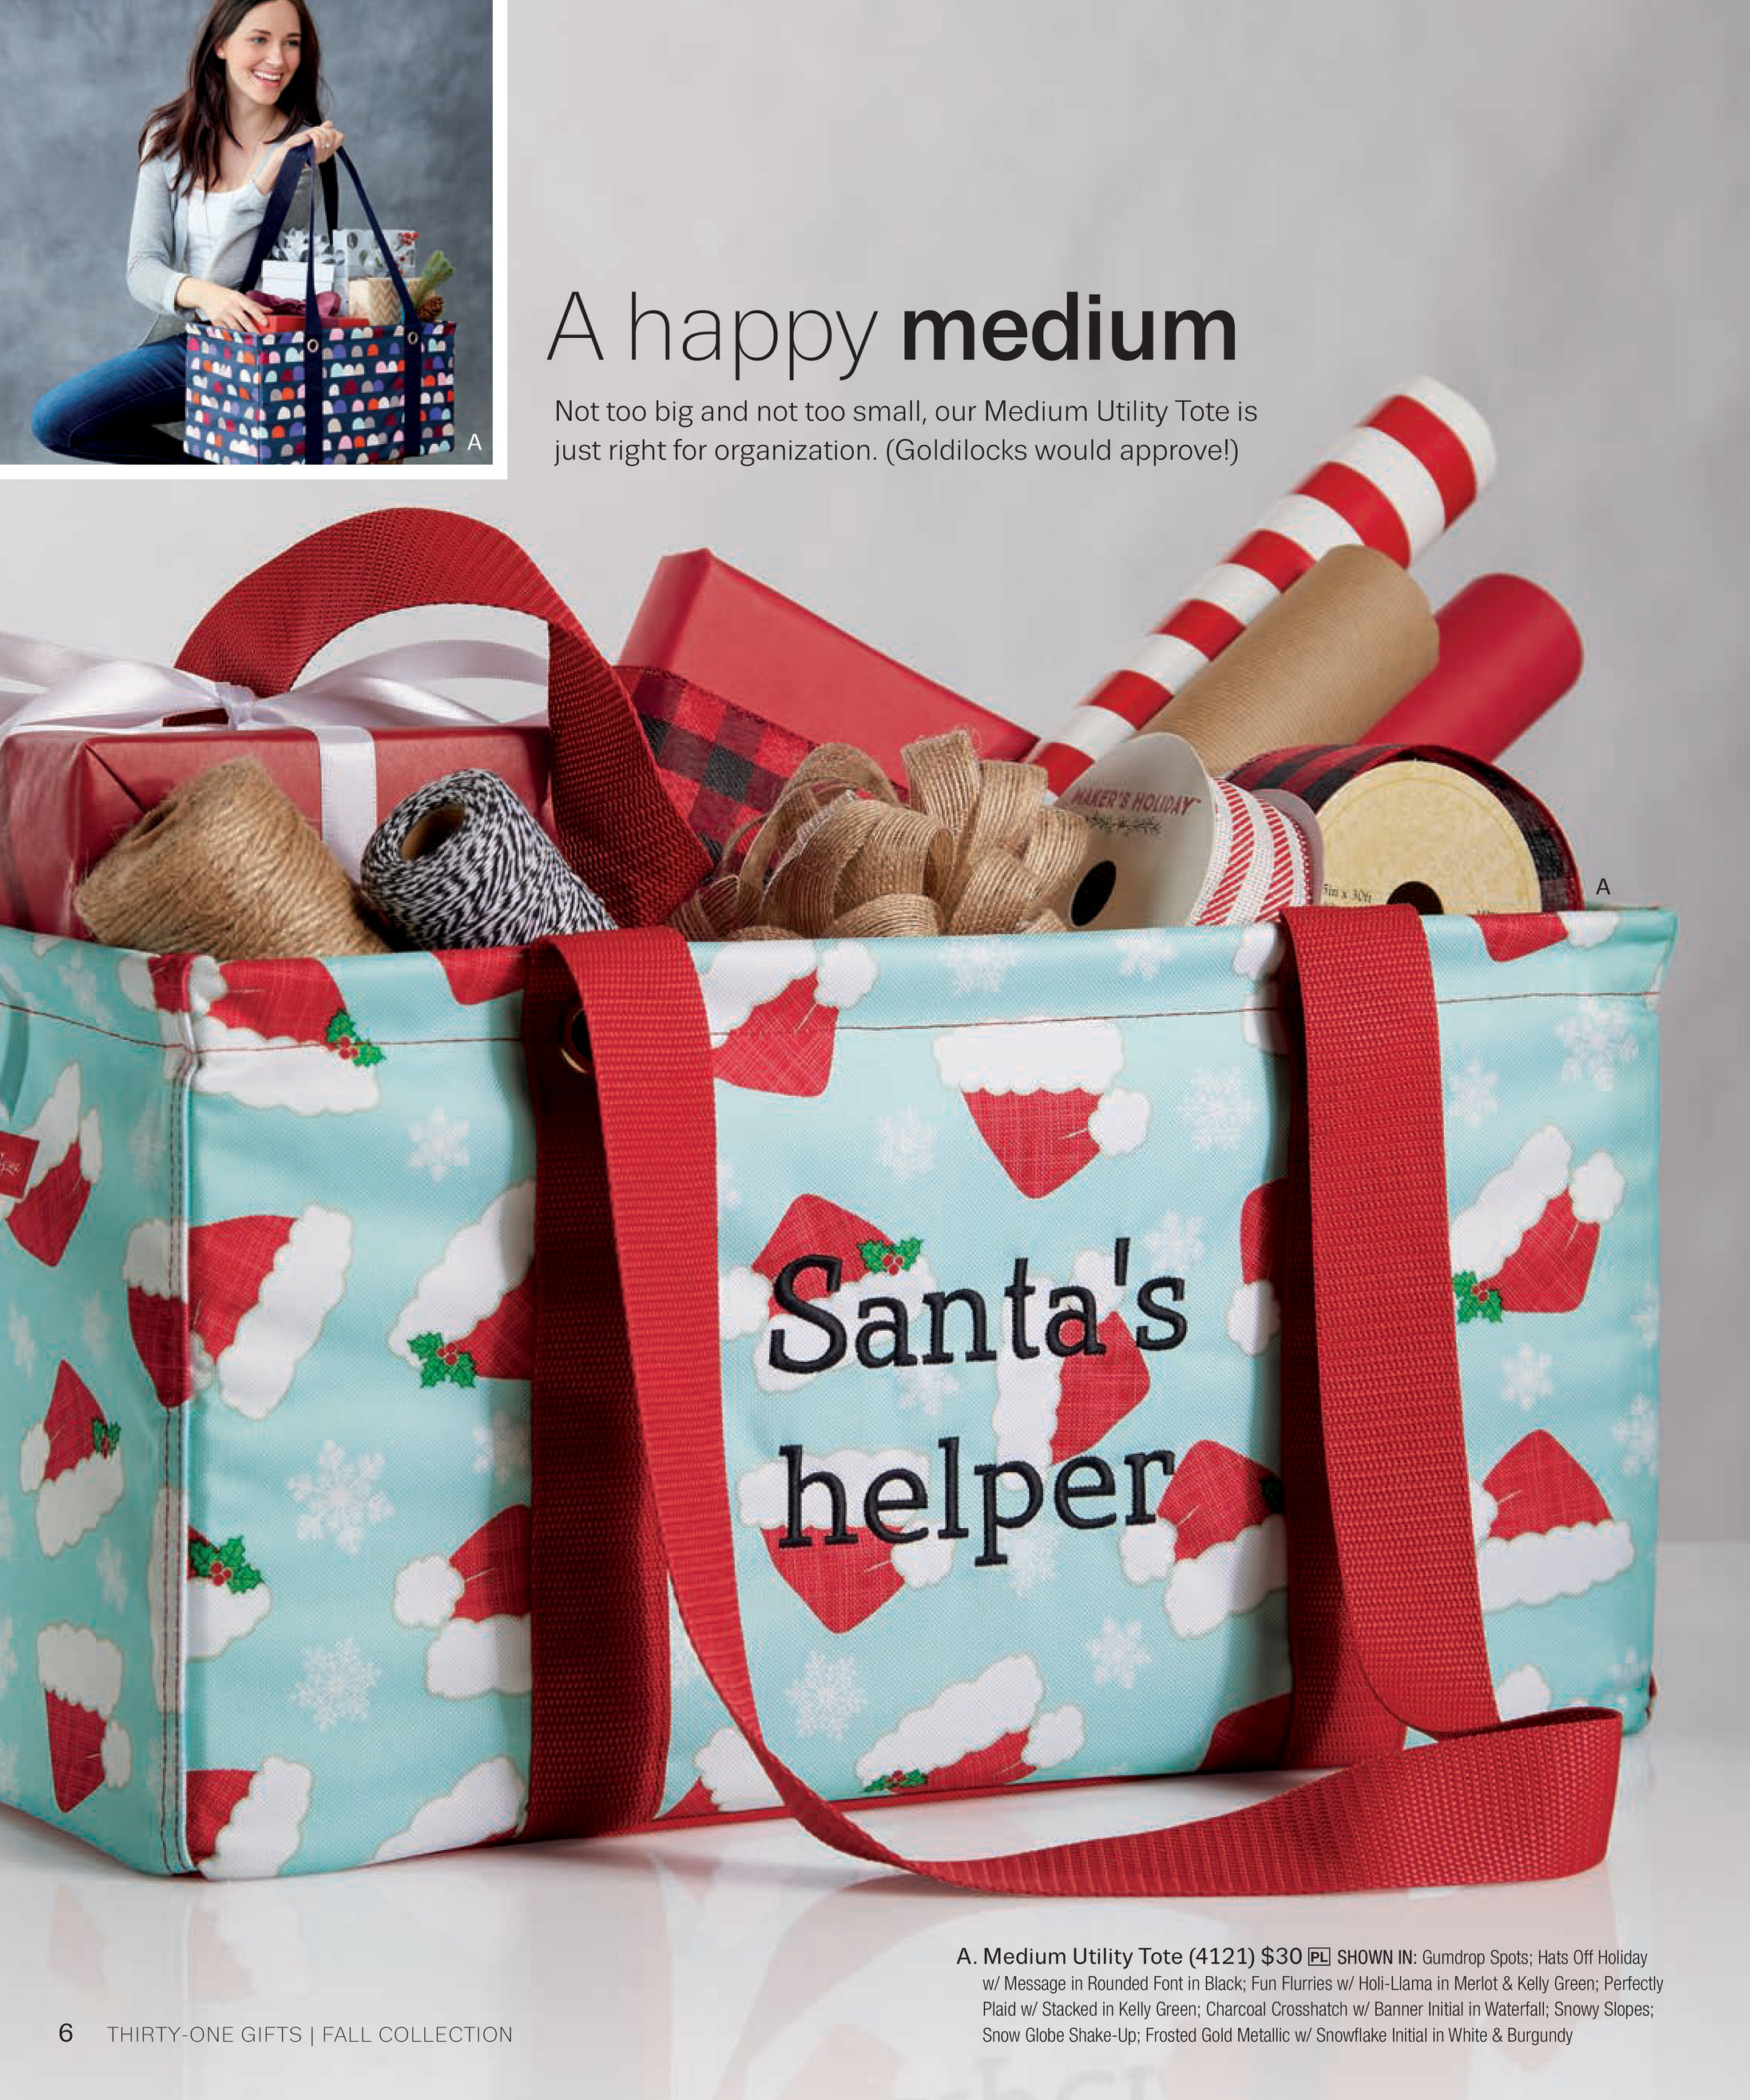 Thirty-One Gifts - Kindness tip! Our Small Utility Tote is perfect